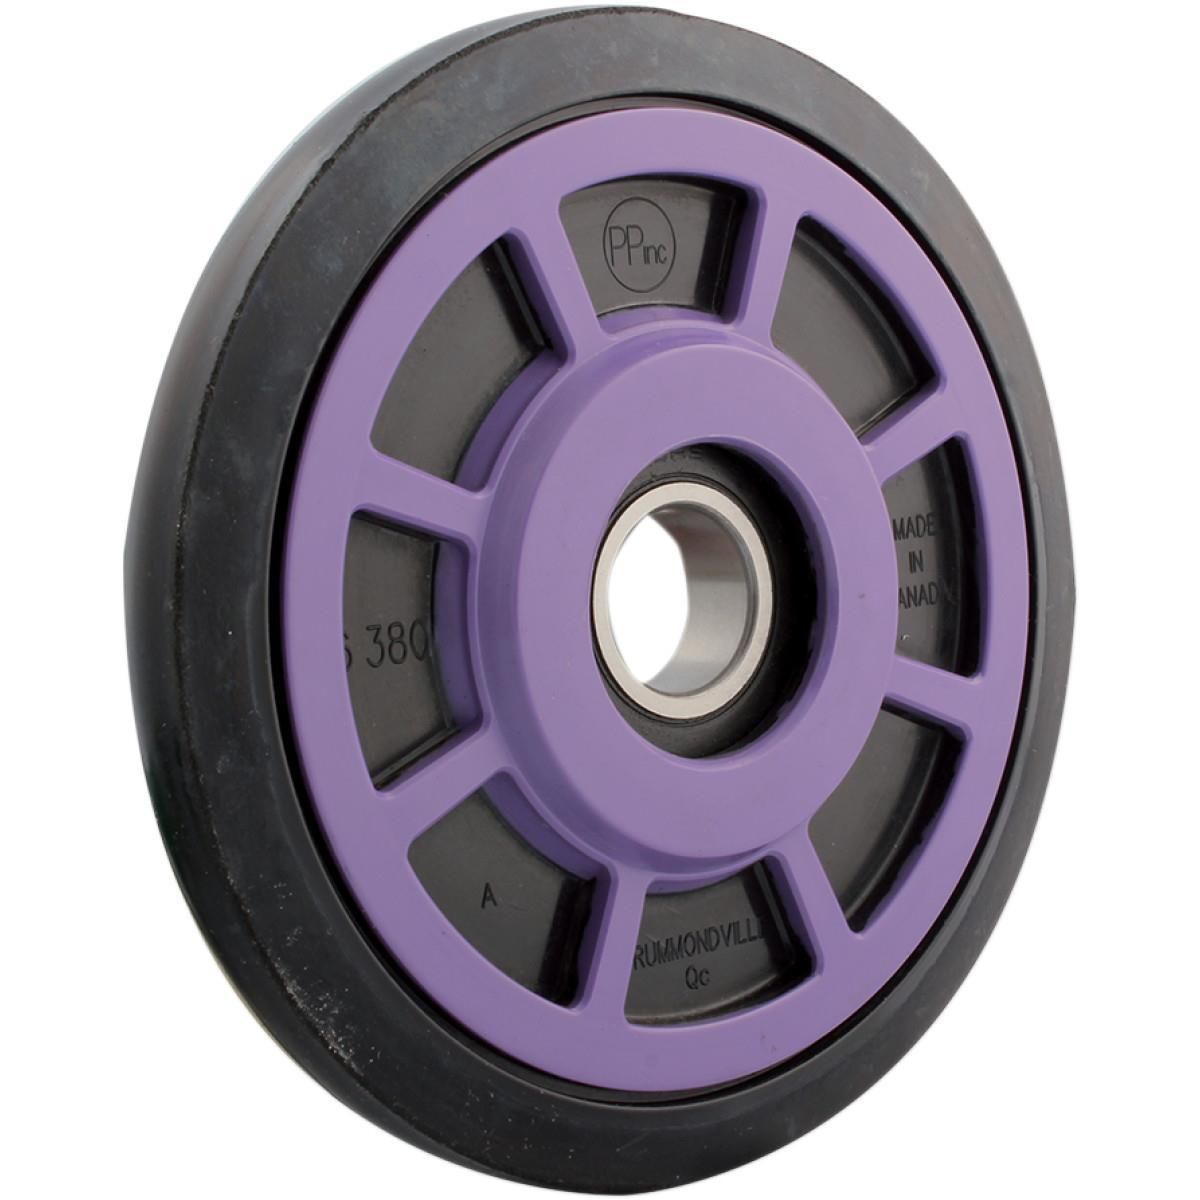 3306-KIMPEX-04-0633-23 Colored Idler Wheel - 6.38in. x 1.000in. (without Insert) - Purple